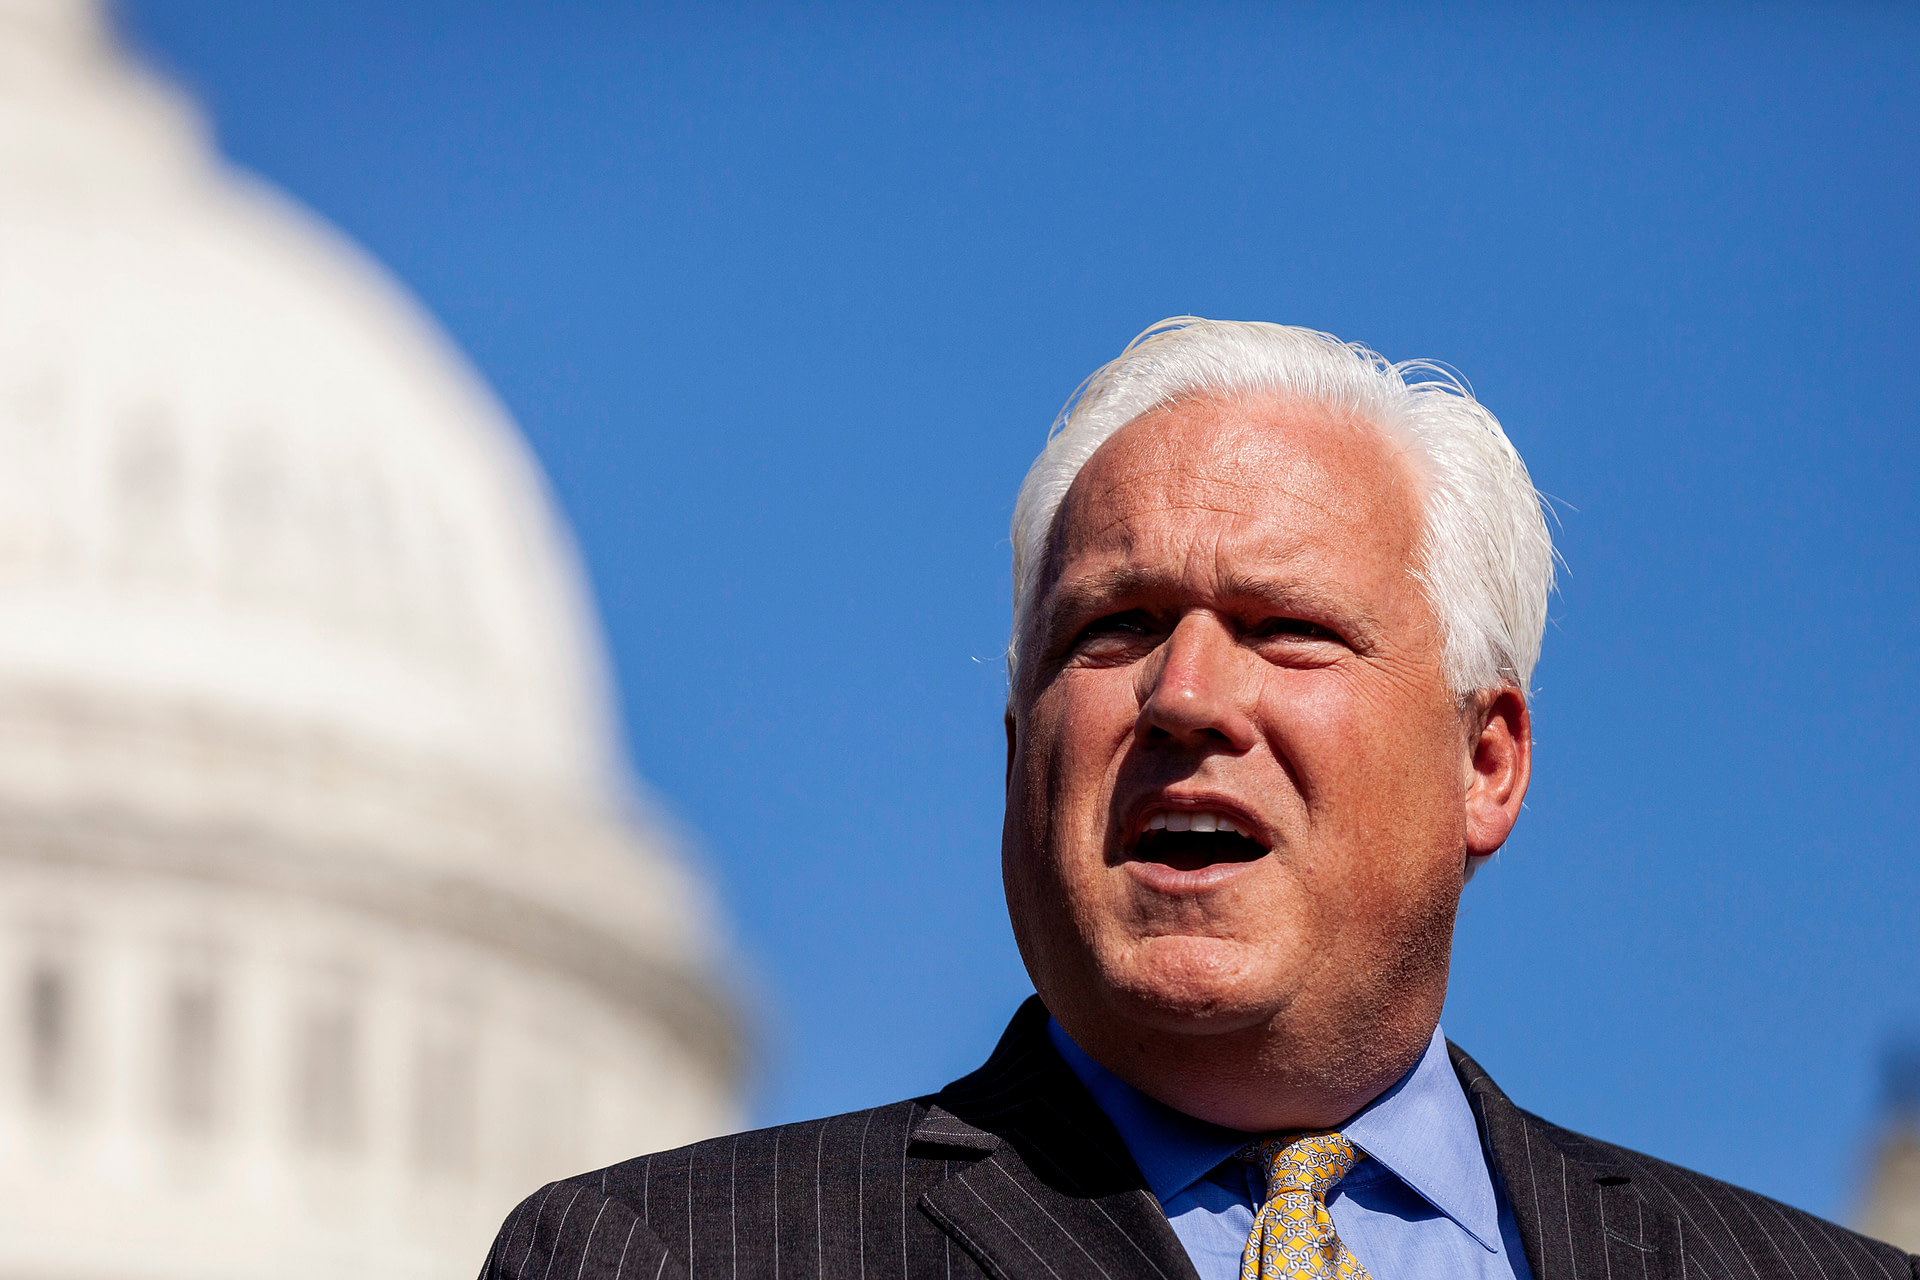 Matt Schlapp slapped with lawsuit after allegation of fondling GOP operative